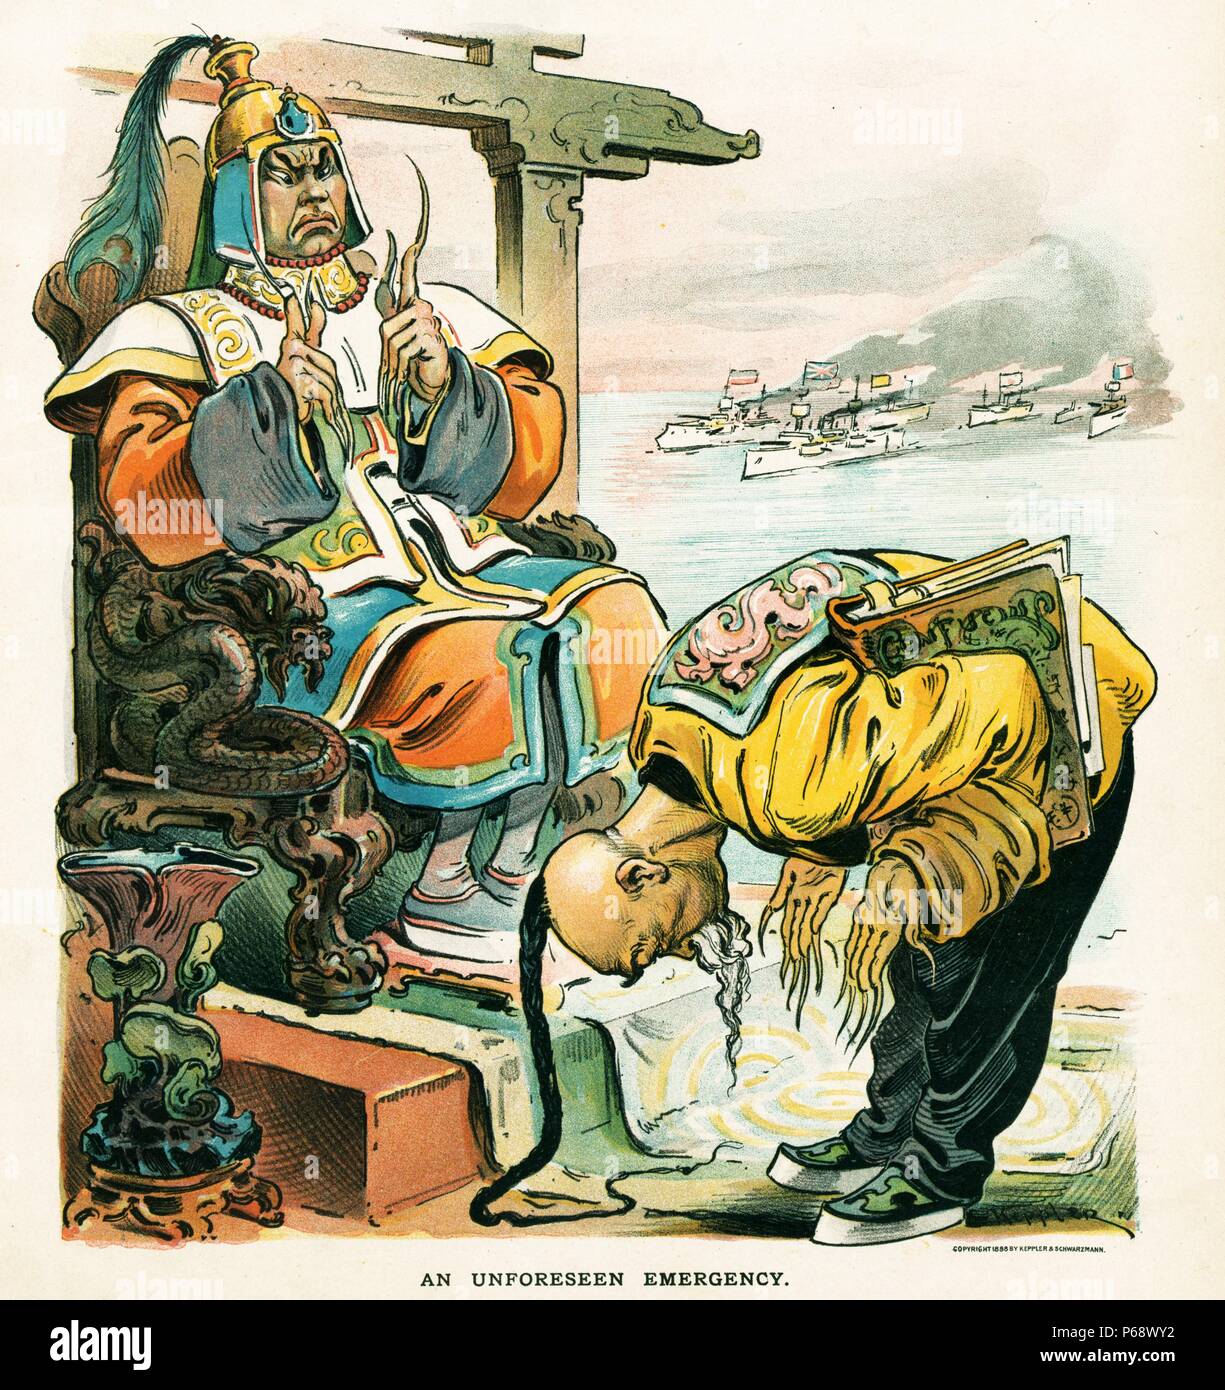 An unforeseen emergency by Udo Keppler, 1872-1956, artist, 1898. the Emperor of China sitting on a throne talking with a wise minister, seeking the advice of Confucius, as foreign ships, from England, Germany, Japan, France, and other countries, approach in the background. The Guangxu Emperor 1871 – 14 November 1908, was the eleventh emperor of the Qing Dynasty Stock Photo